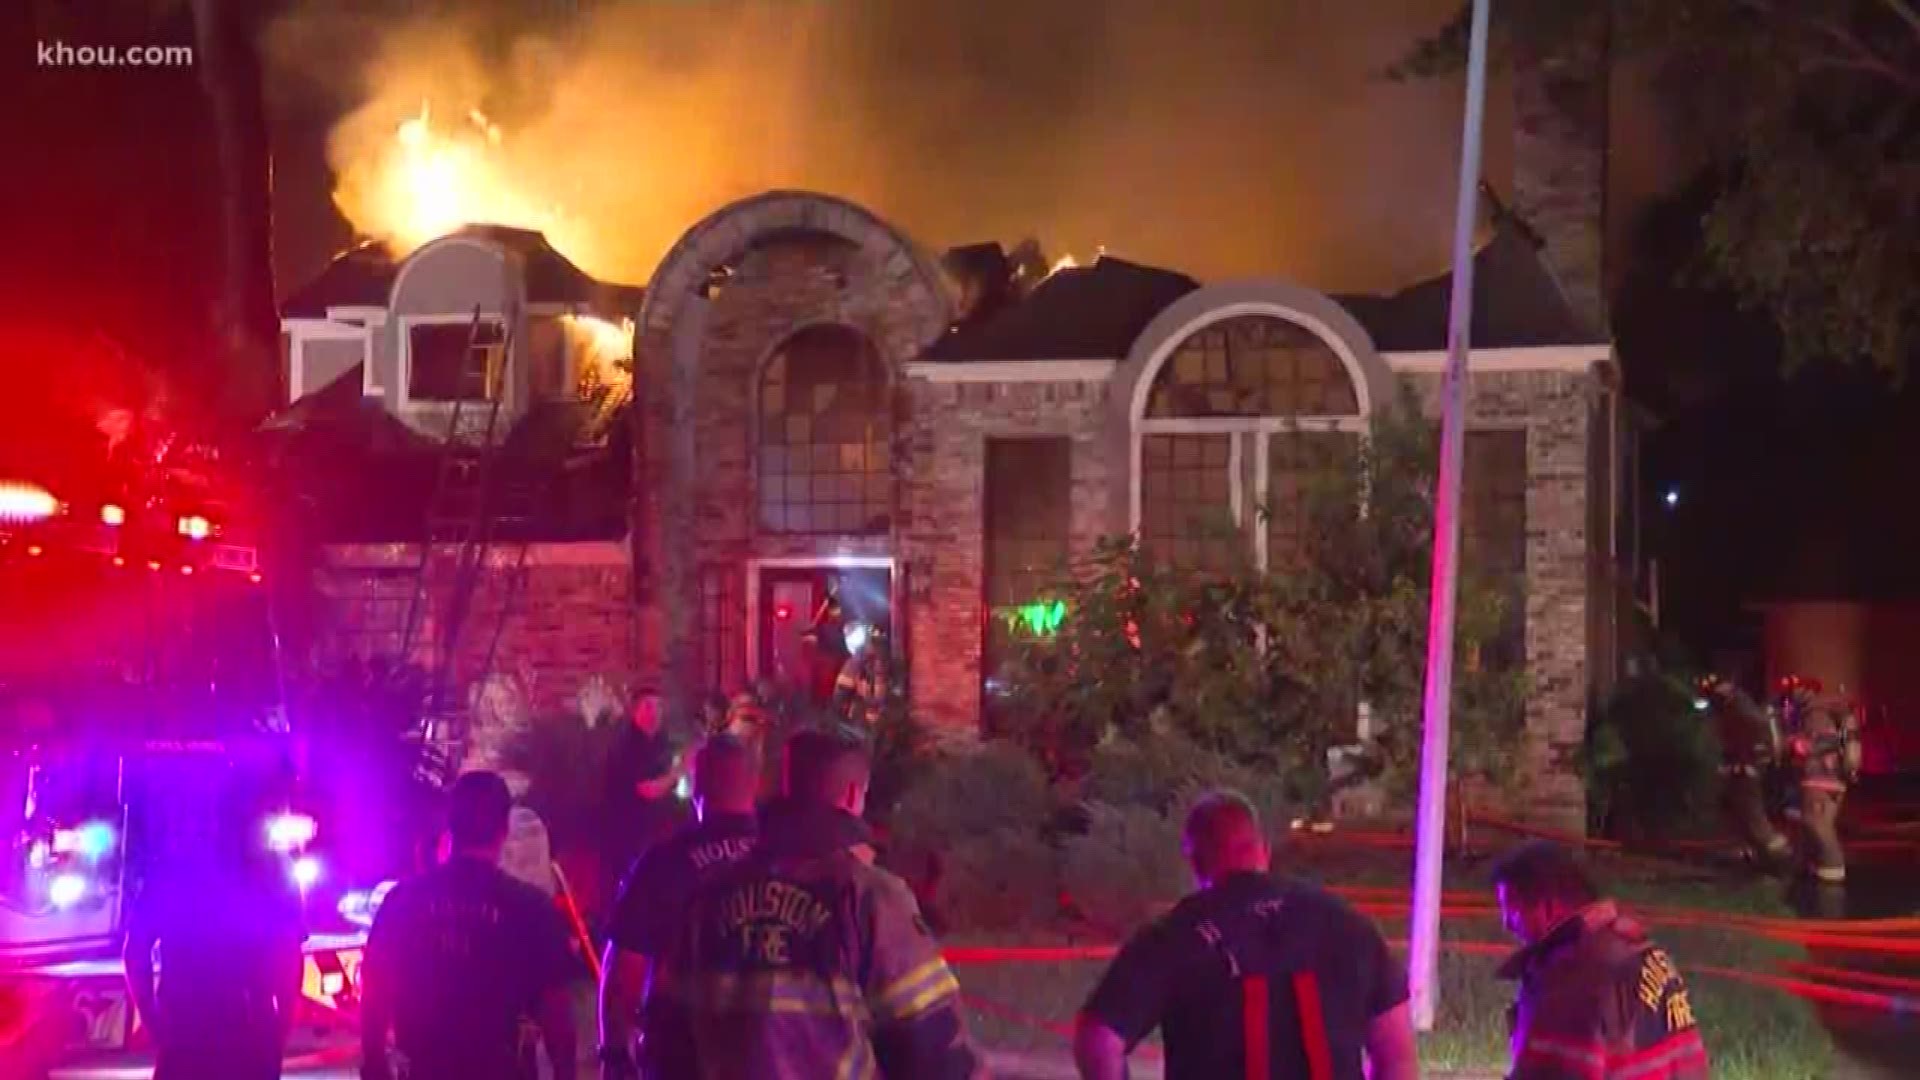 Firefighters battled a large fire that destroyed a home in northwest Houston overnight.